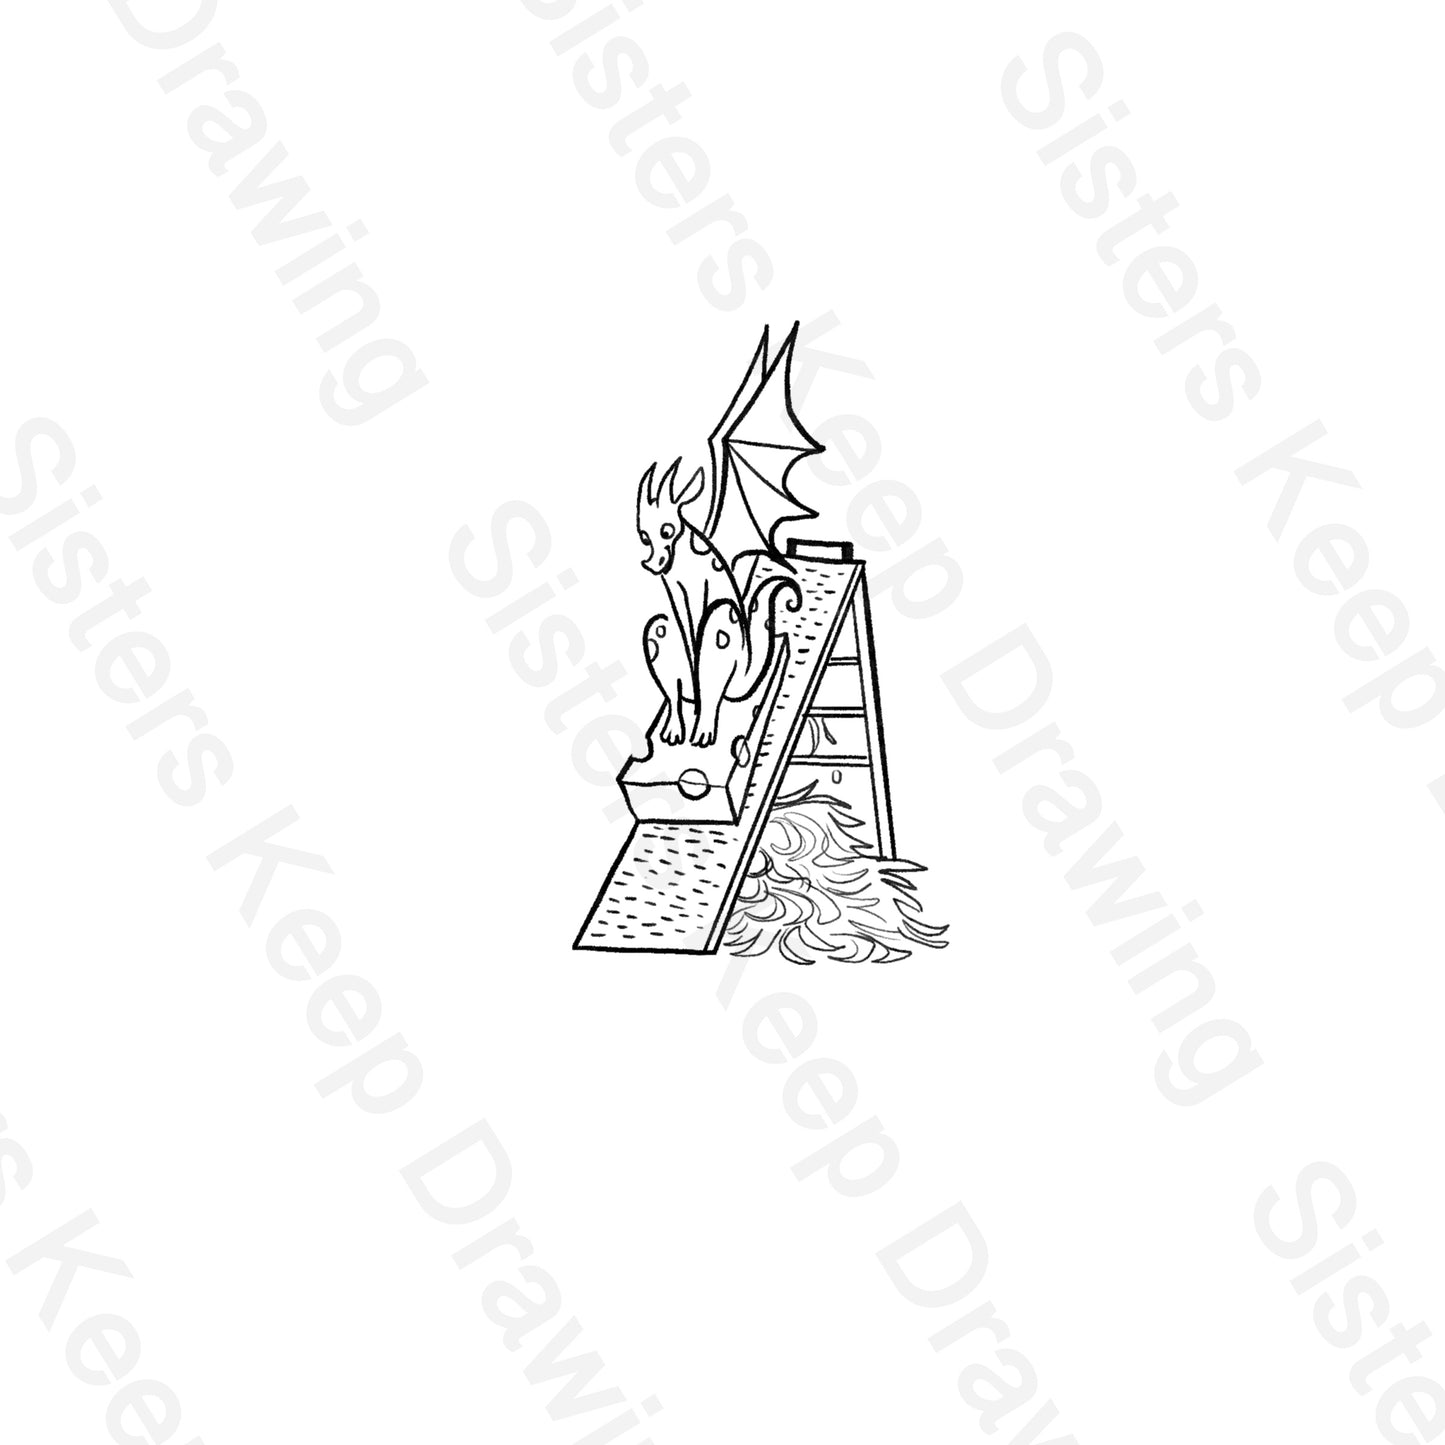 Tiny Dragon cheese grater -Tattoo Transparent Permission PNG- instant download digital printable artw